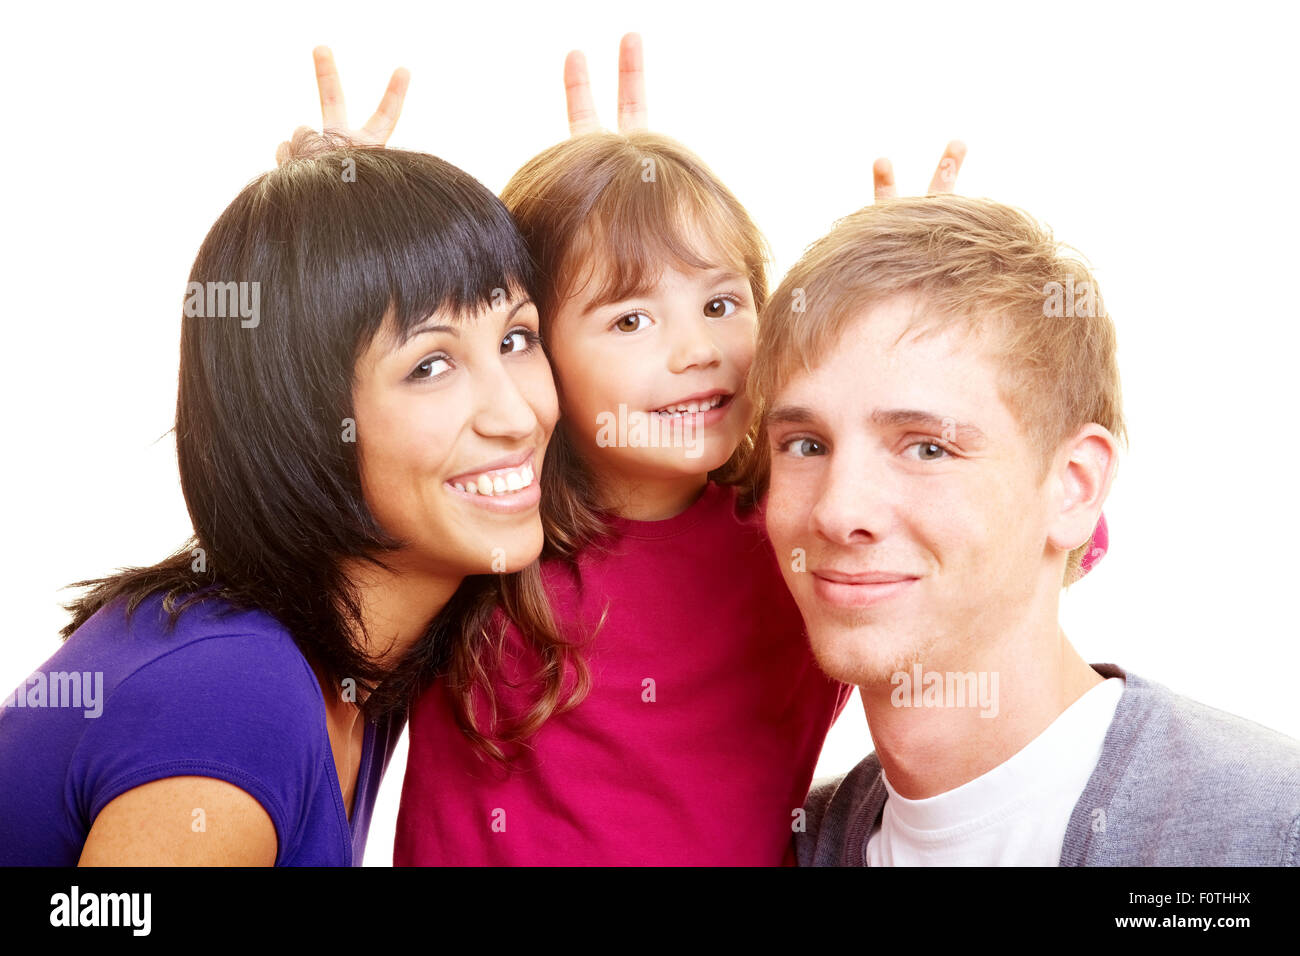 Family portrait with fingers behind the heads Stock Photo